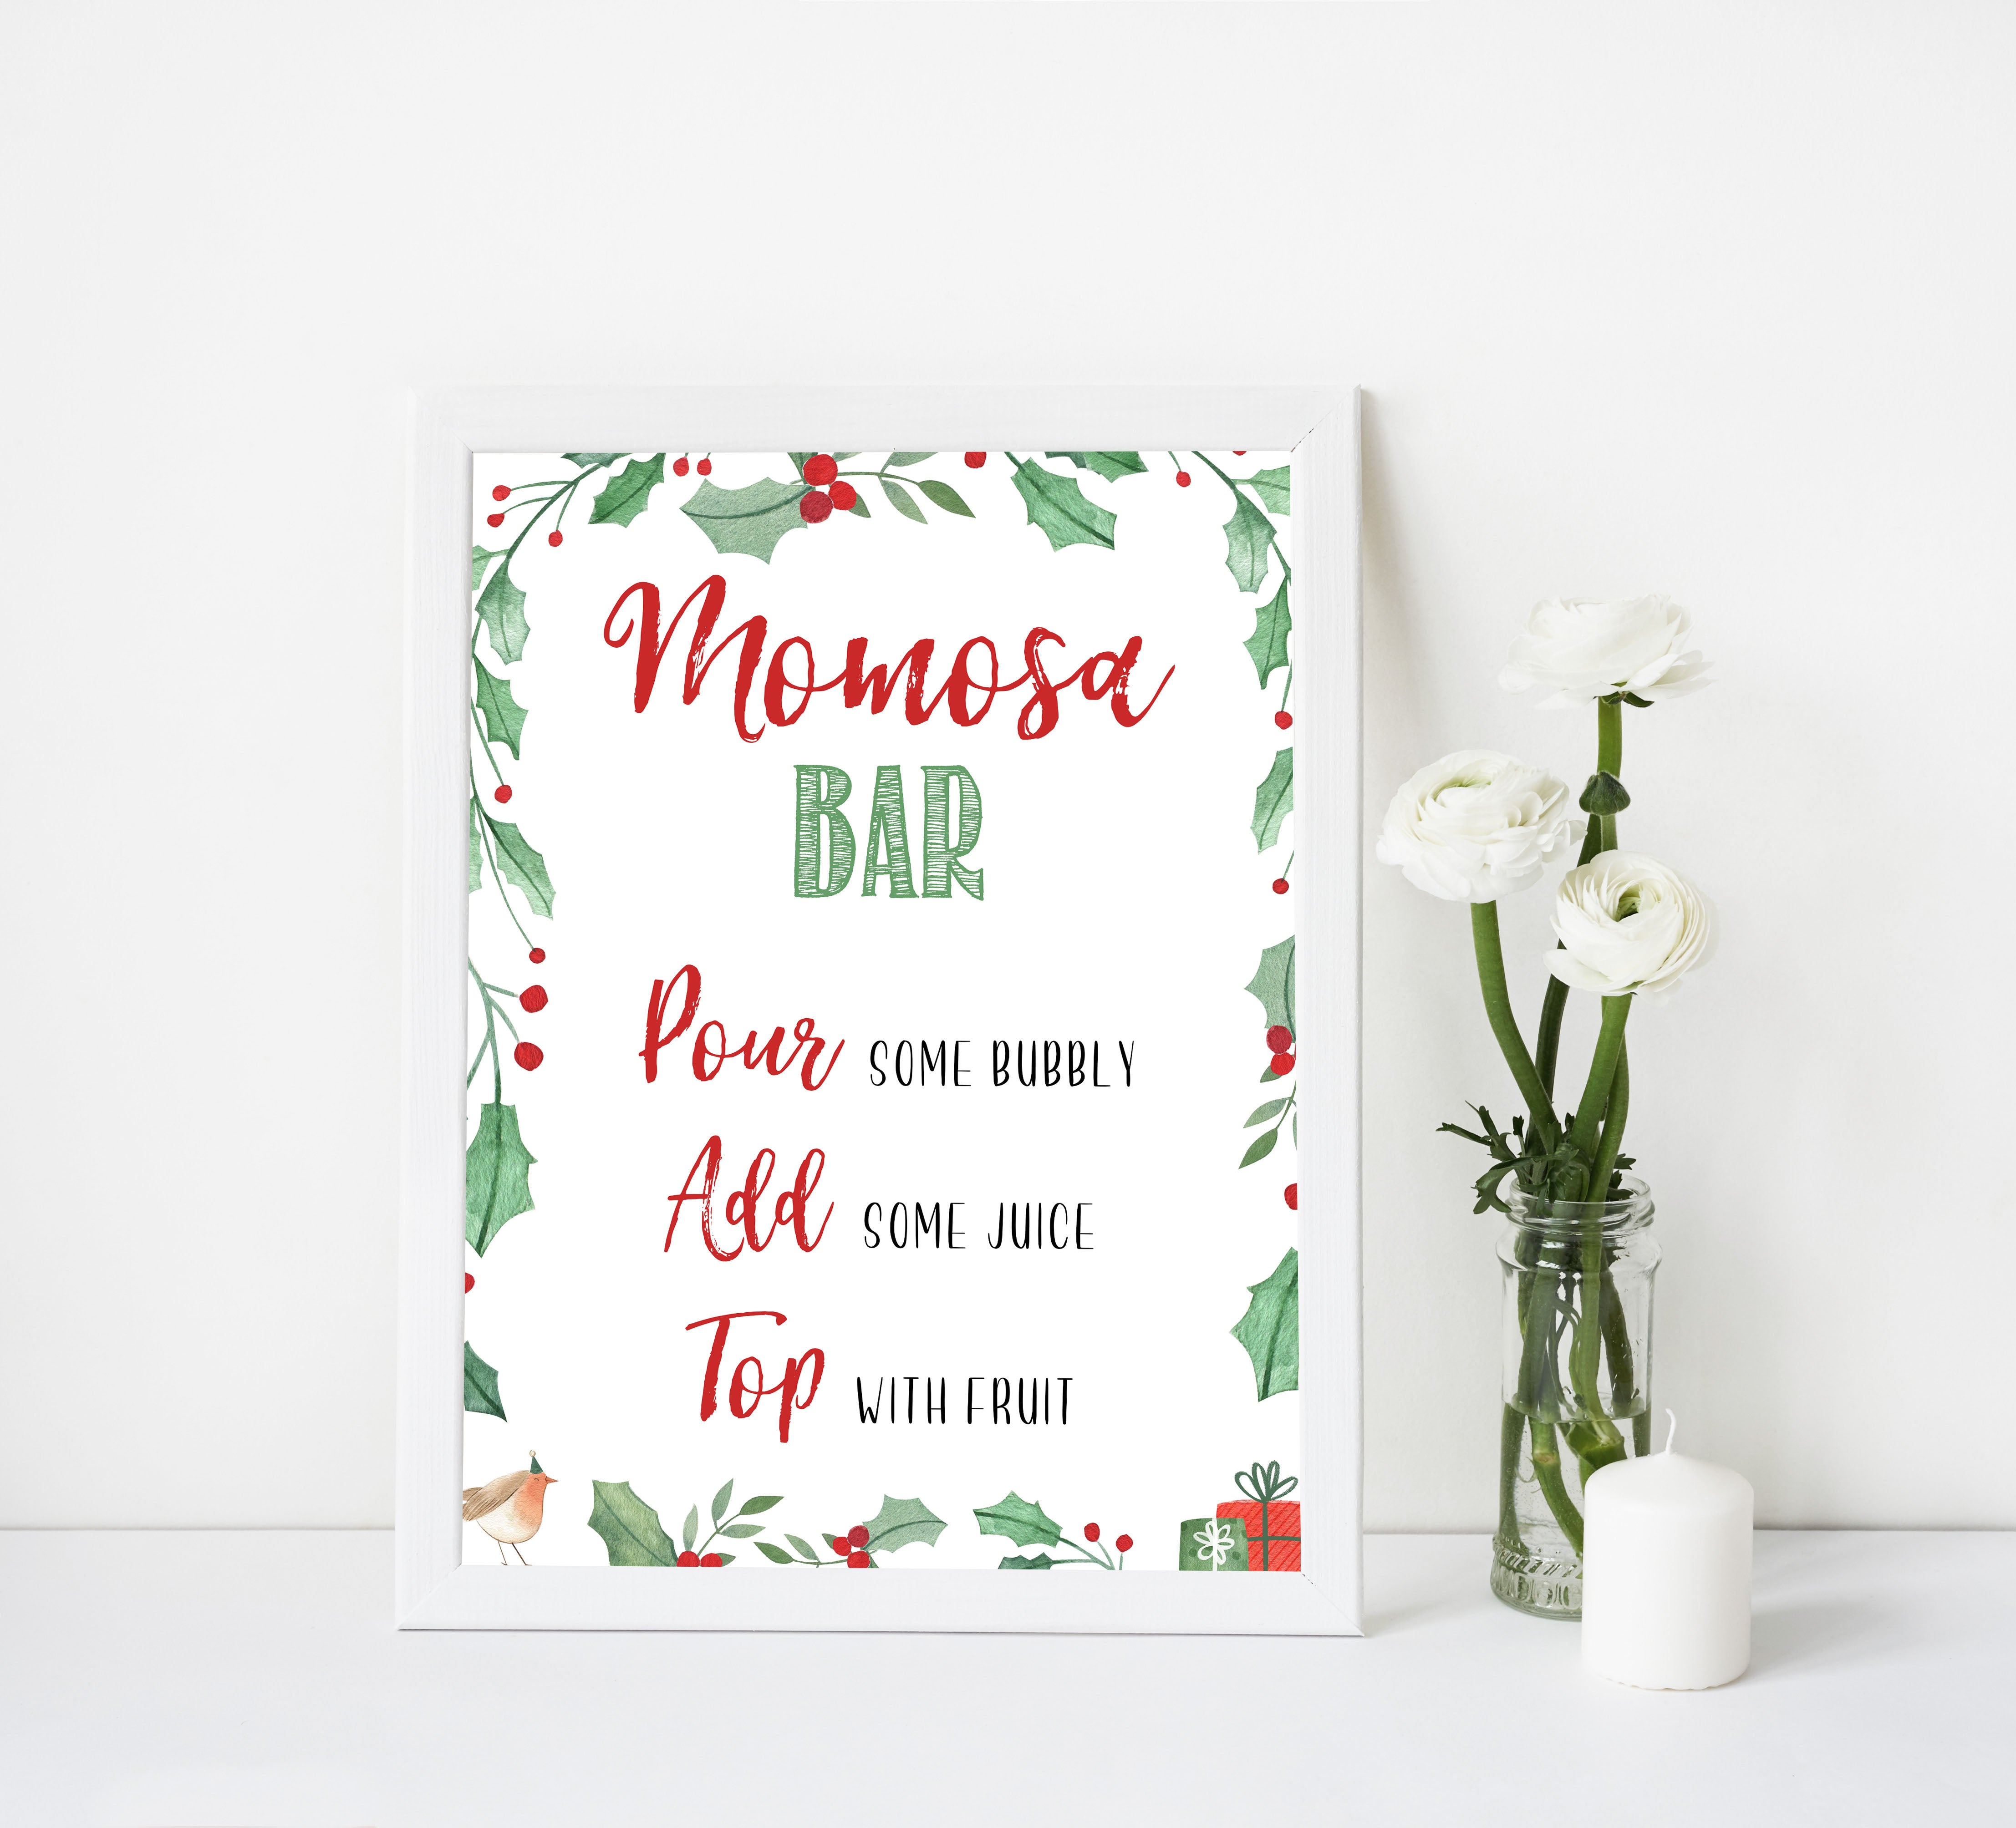 Christmas baby shower signs, momosa baby shower sign, baby shower decor, printable baby signs, baby decor, festive baby shower